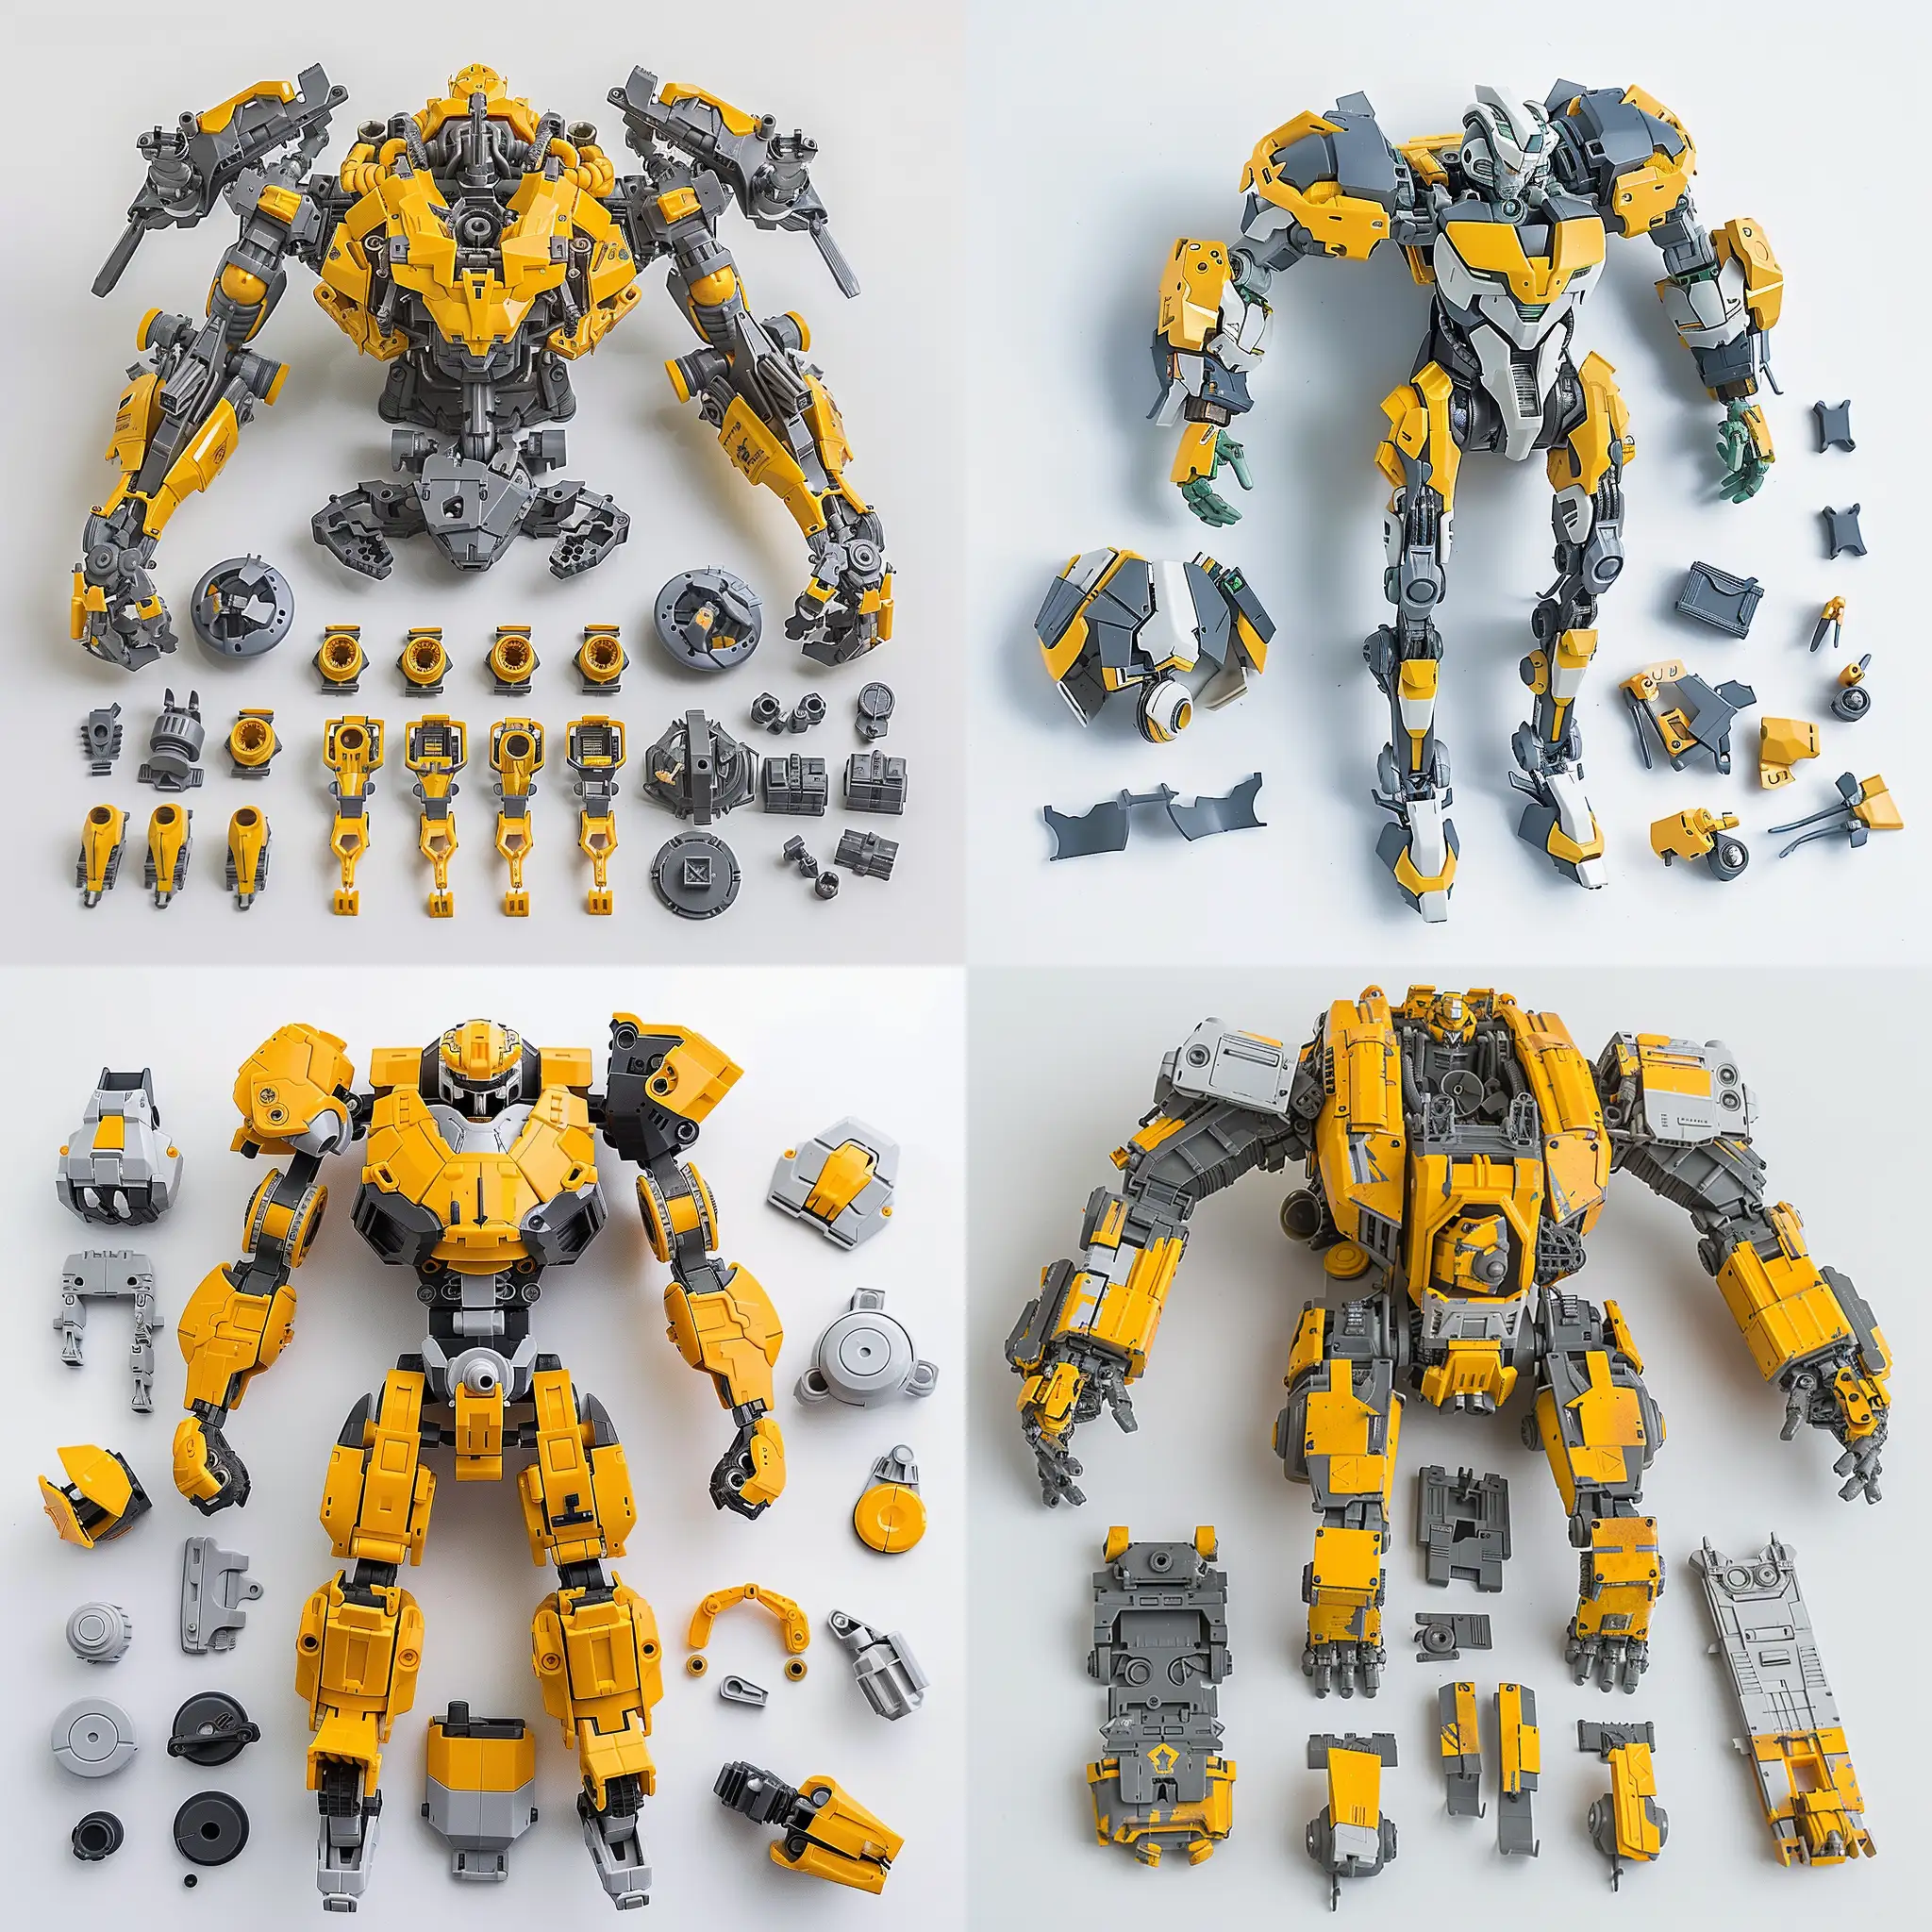 plastic model kit of a robot, parts in yellow and grey, unassembled in sprue, studio lighting, white background